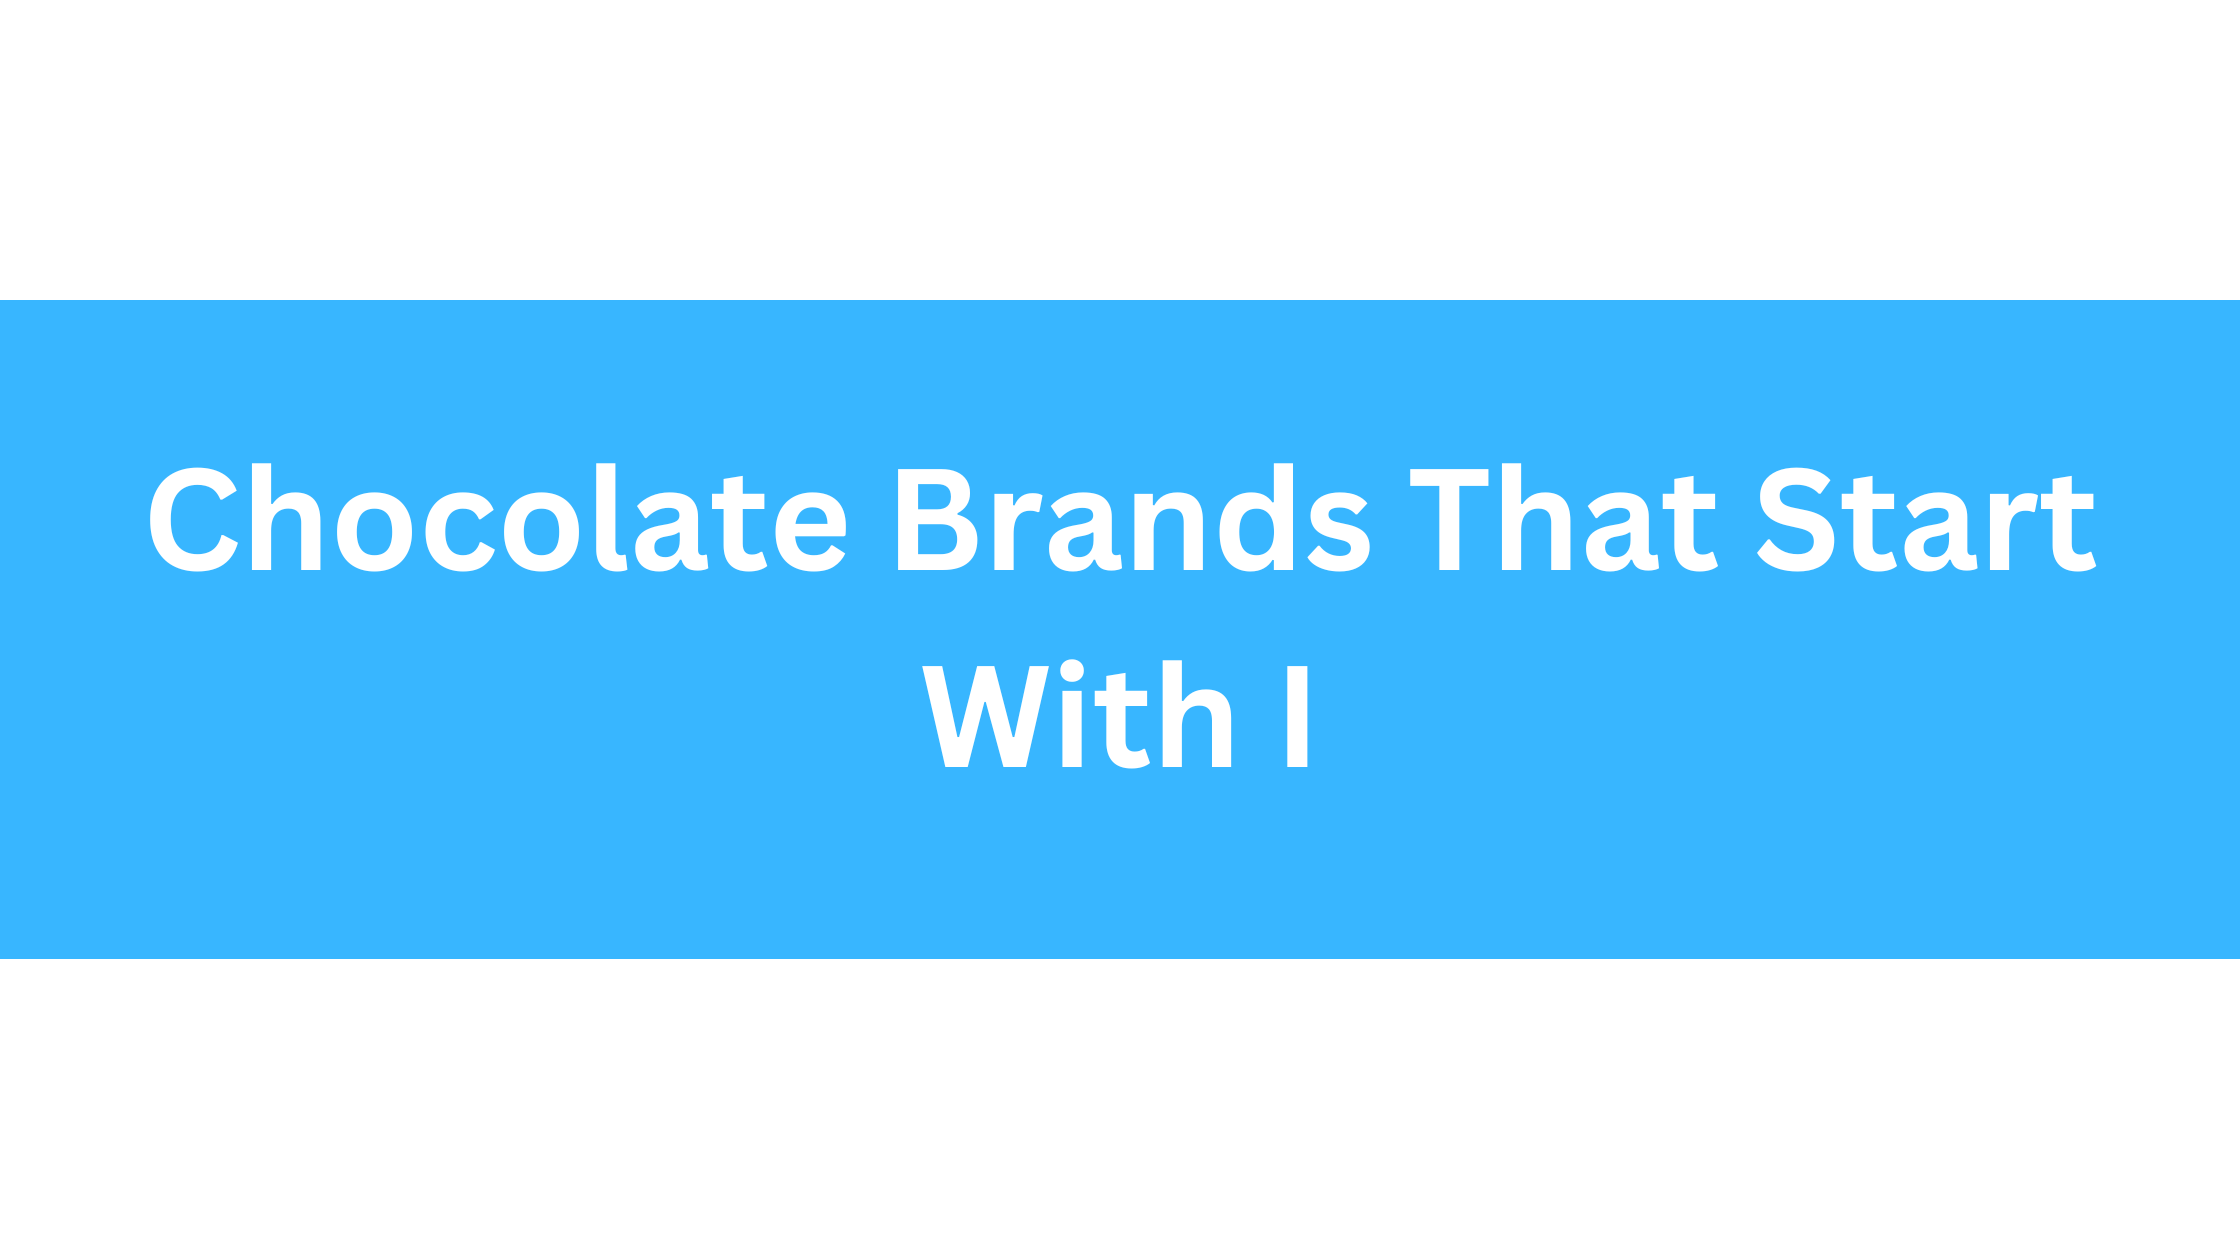 Chocolate Brands That Start With I